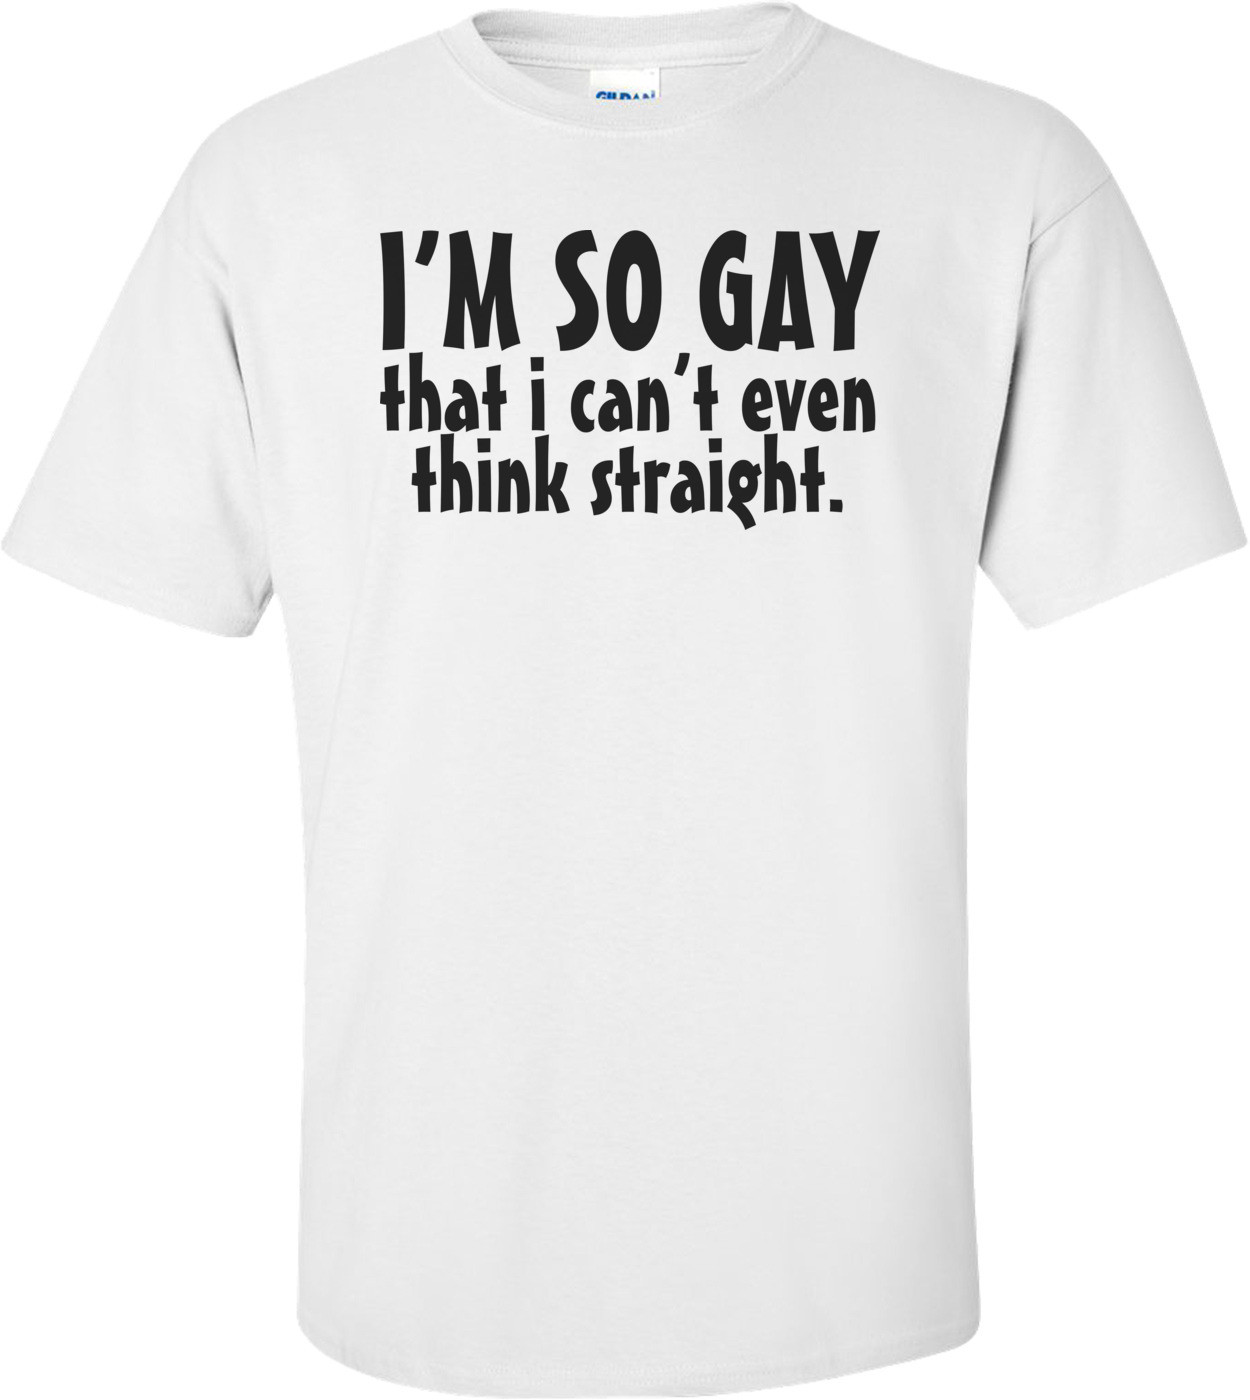 I'm So Gay That I Can't Even Think Straight - Funny T-shirt